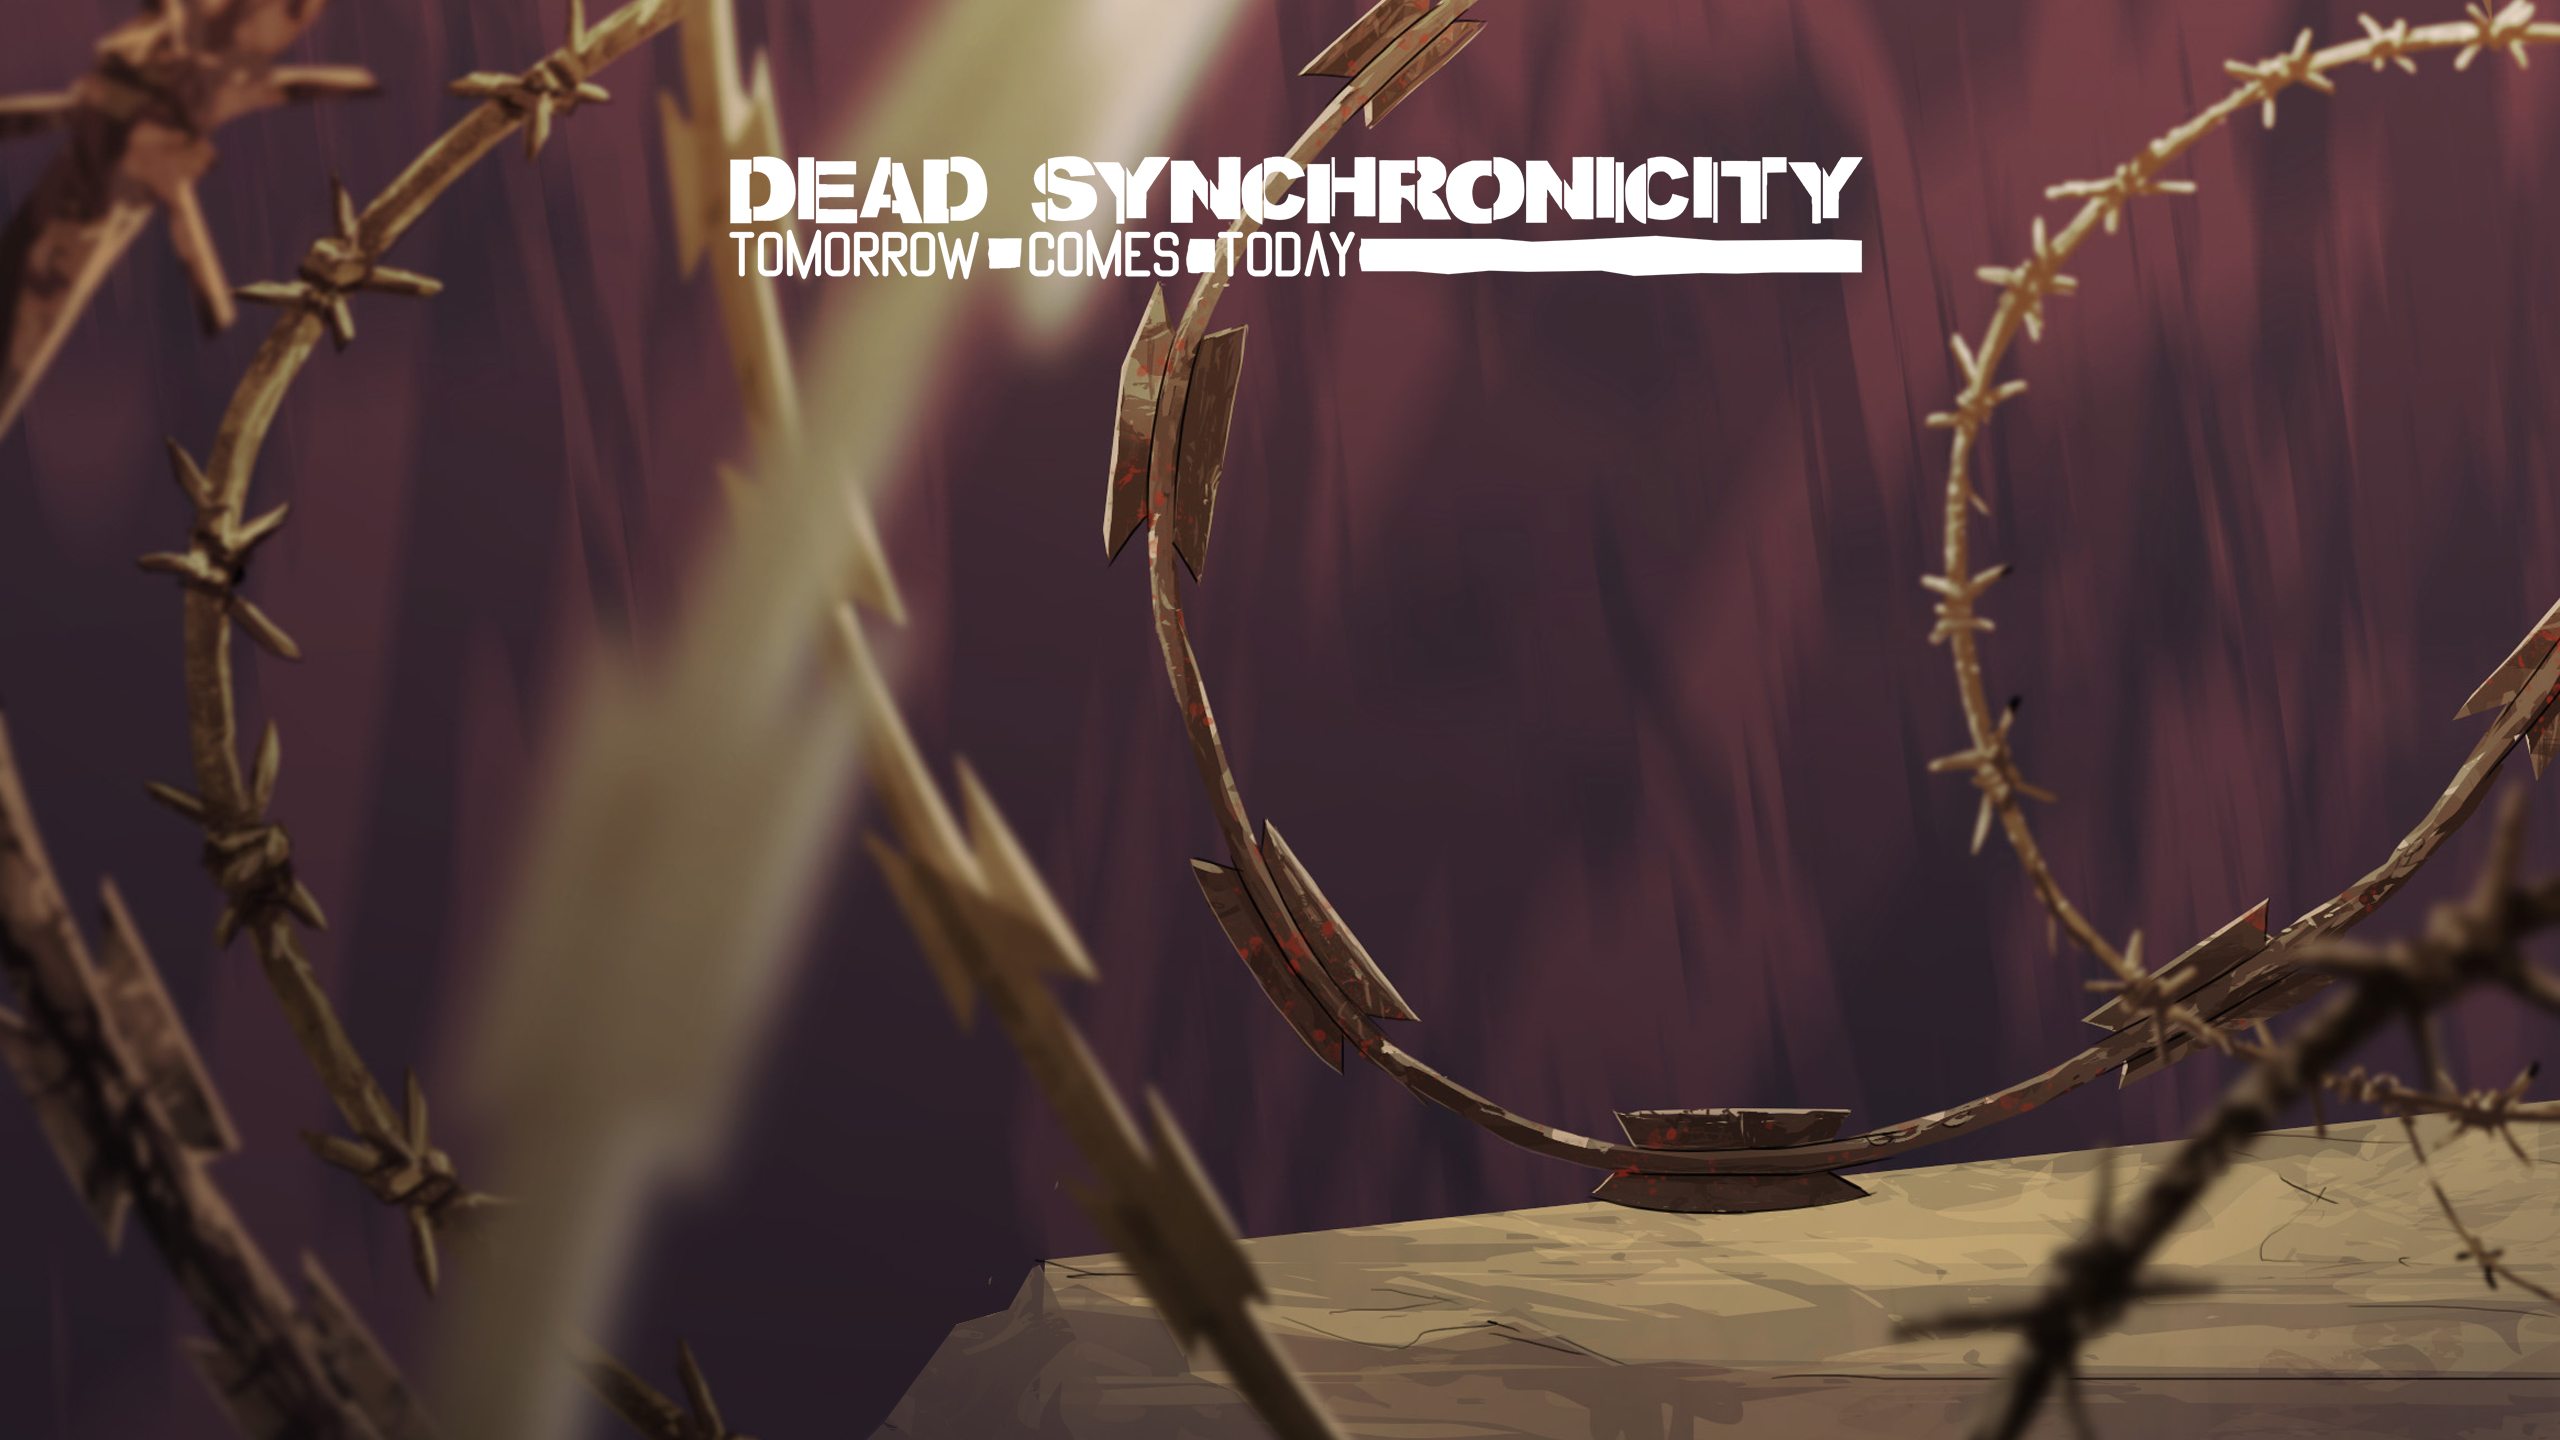 Deaths today. Dead Synchronicity tomorrow comes today ps4.